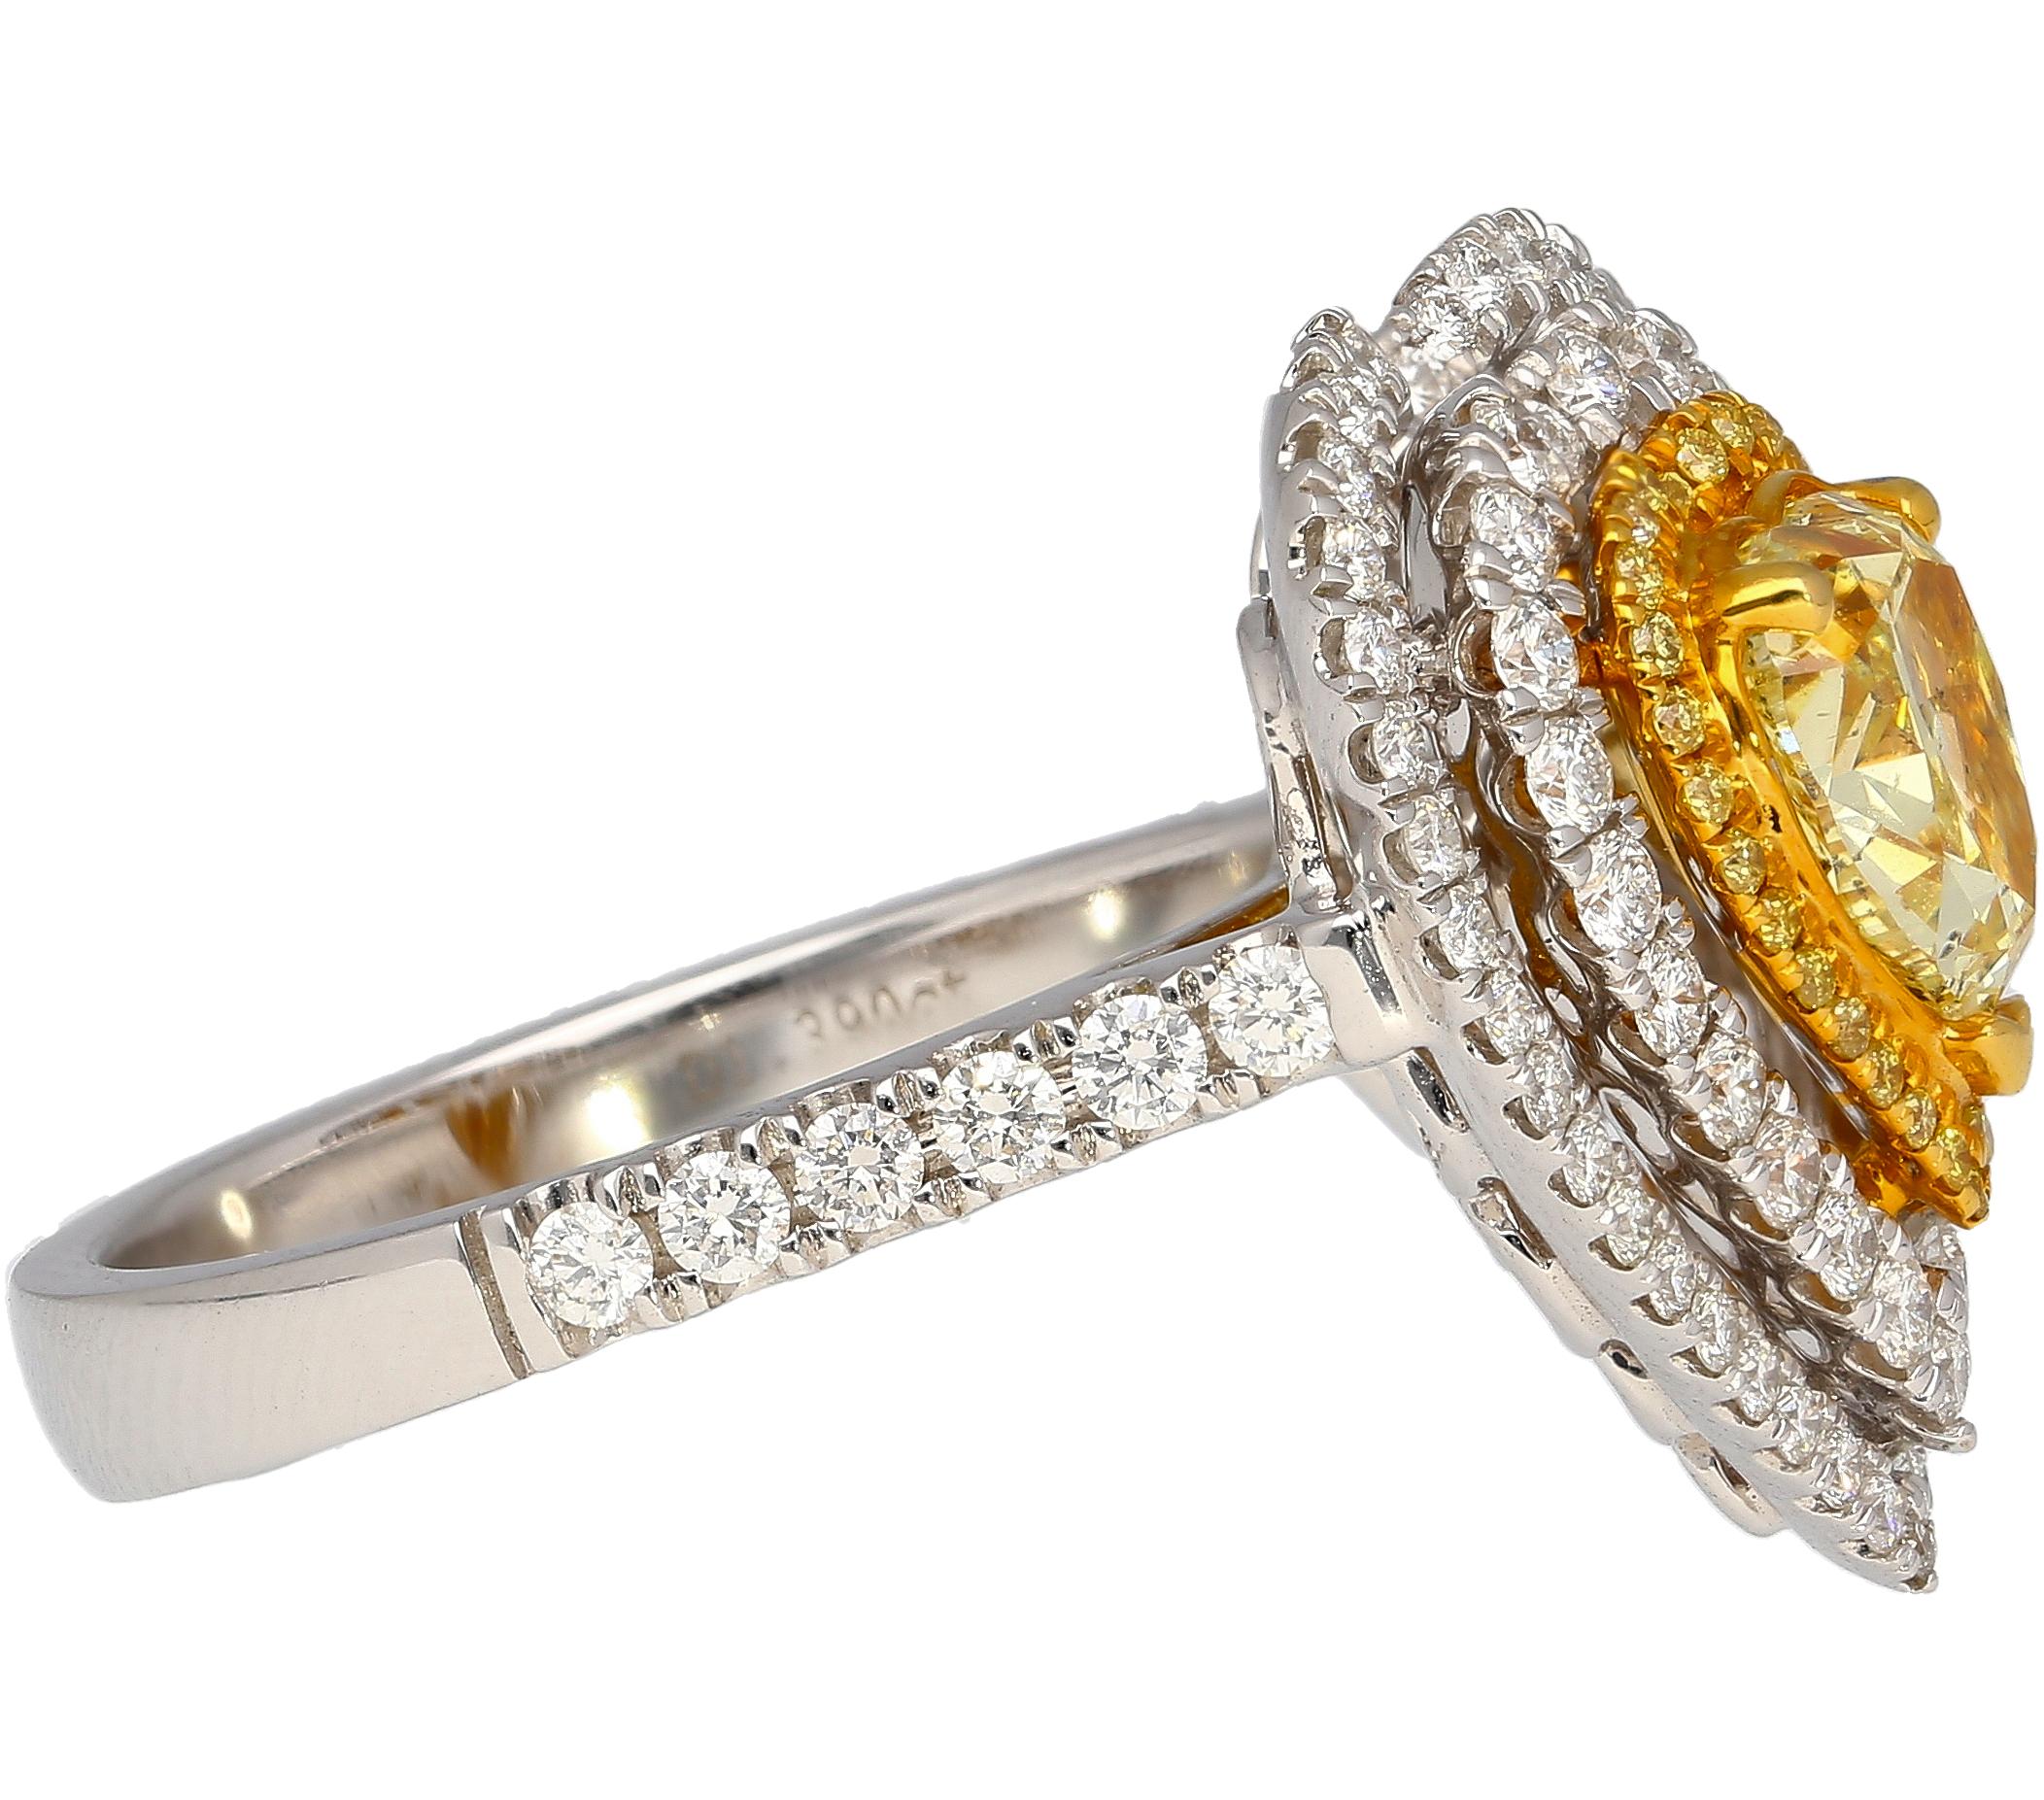 18K white and yellow gold natural diamond ring. Centering a GIA certified 1.39 carat Fancy Yellow heart shape diamond. Adorned with three round cut diamond halo that beautifully curve to form a wide frame heart shape motif.

A heart motif ring with